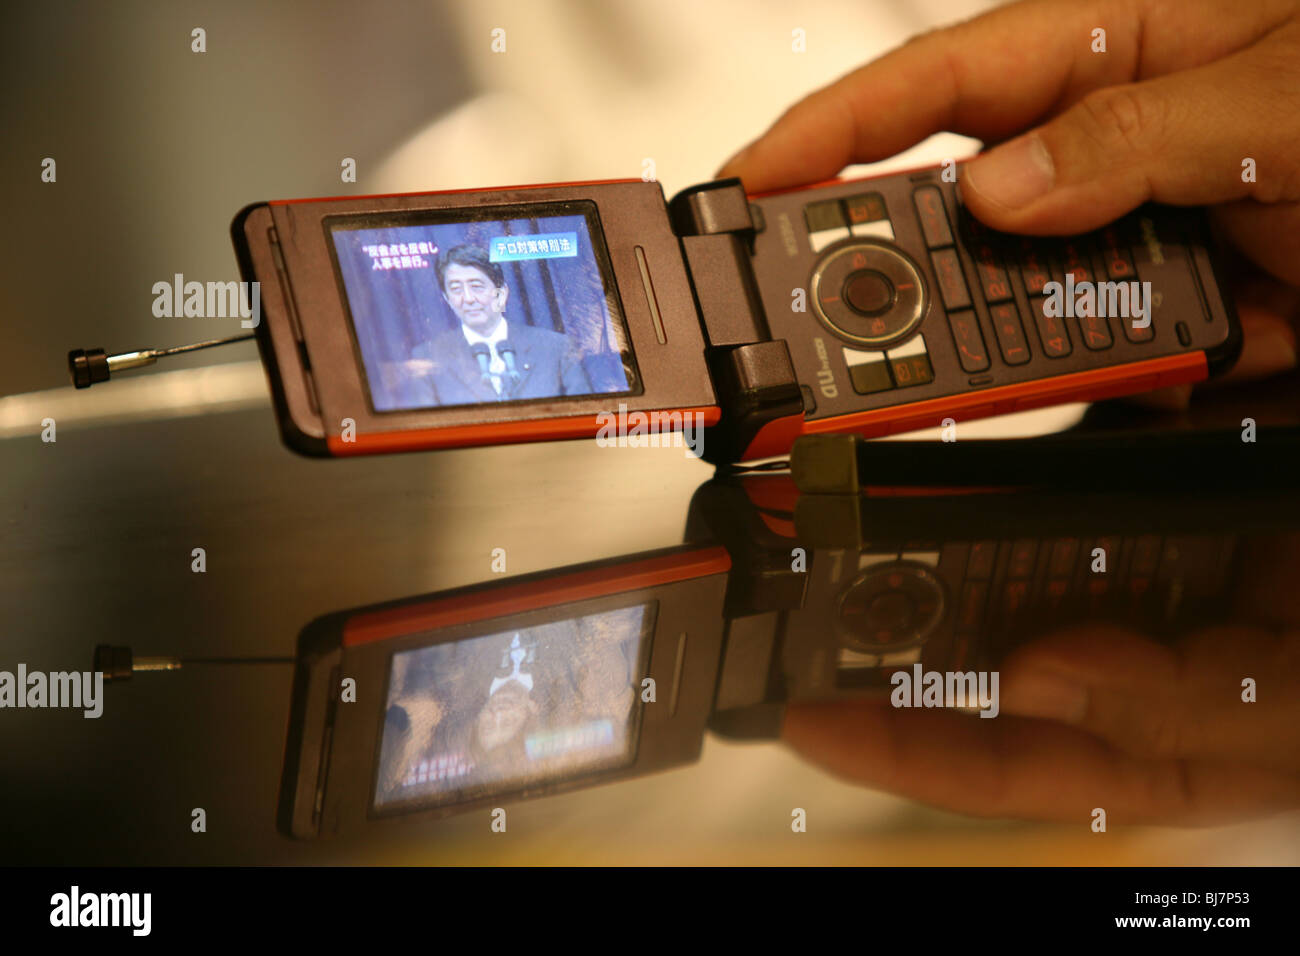 Using a mobile telephone to watch Prime Minister of Japan, Shinzo Abe, on the evening news, Tokyo, Japan Stock Photo